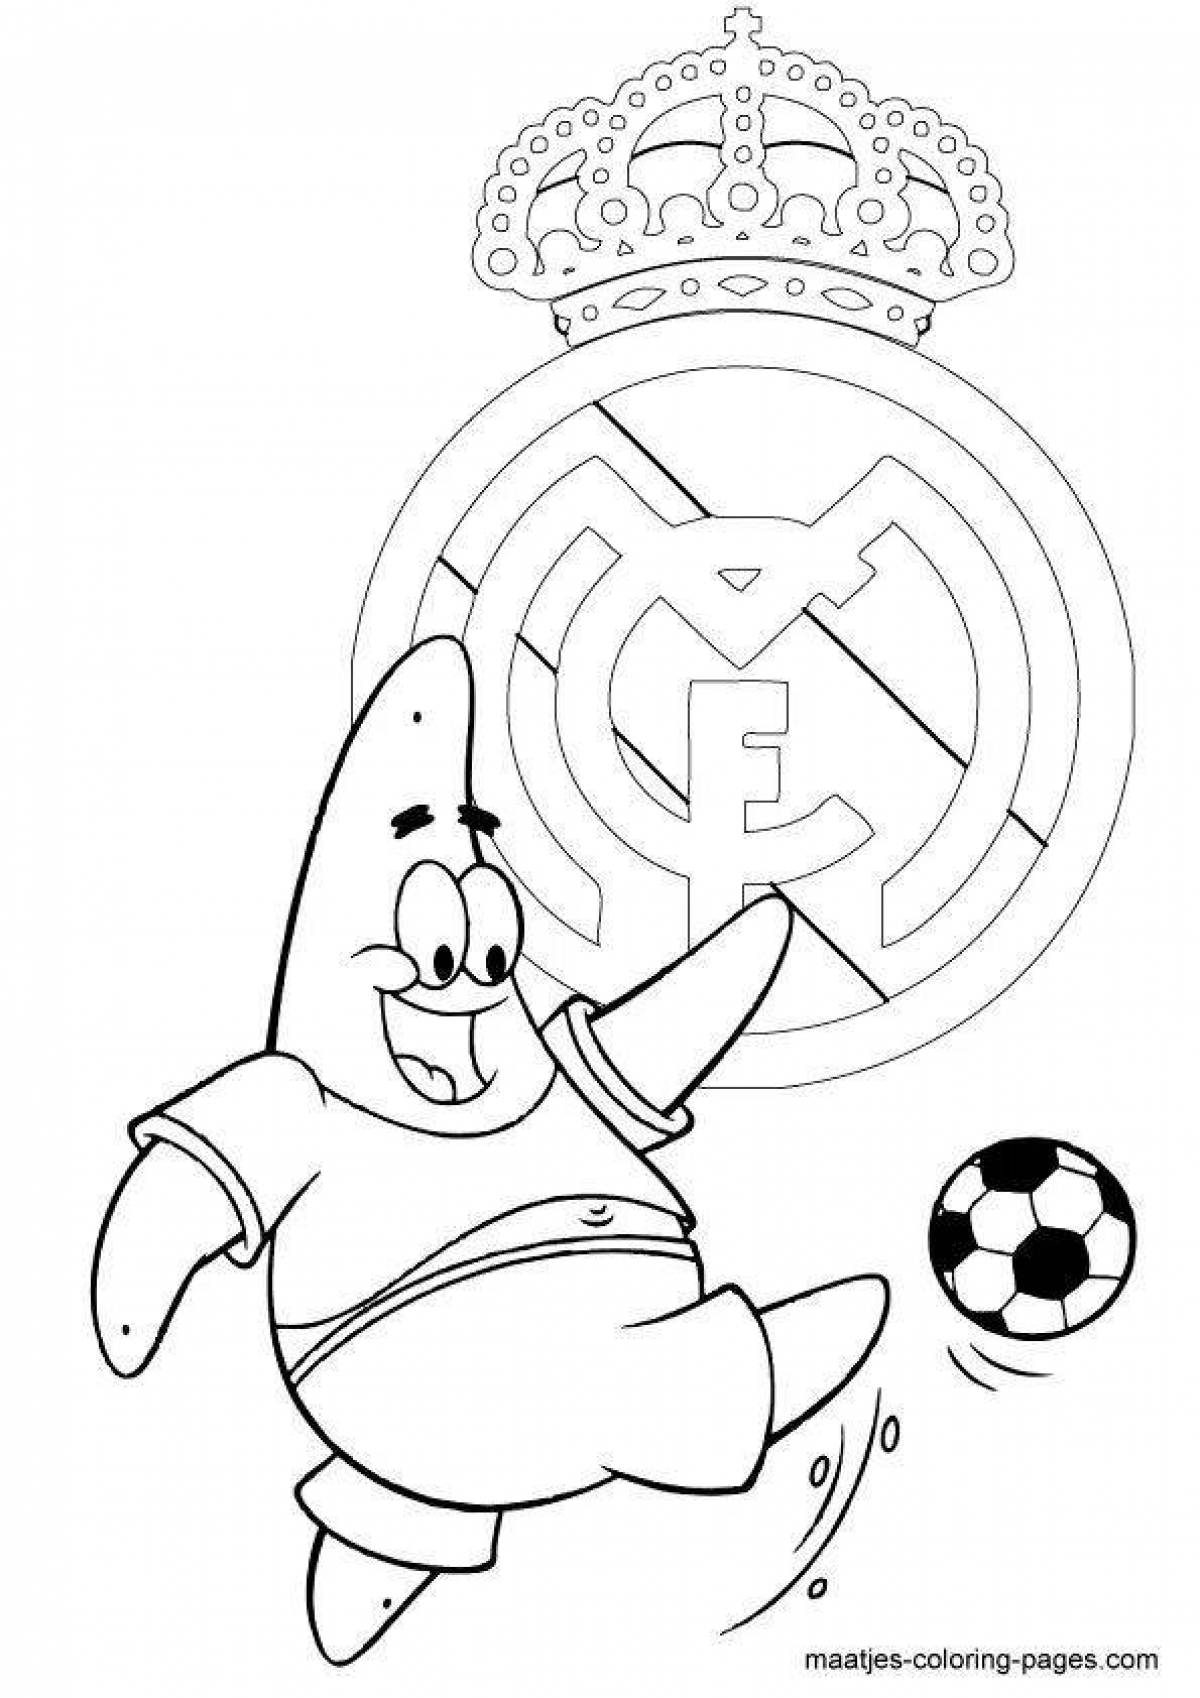 Colorful real madrid coloring book